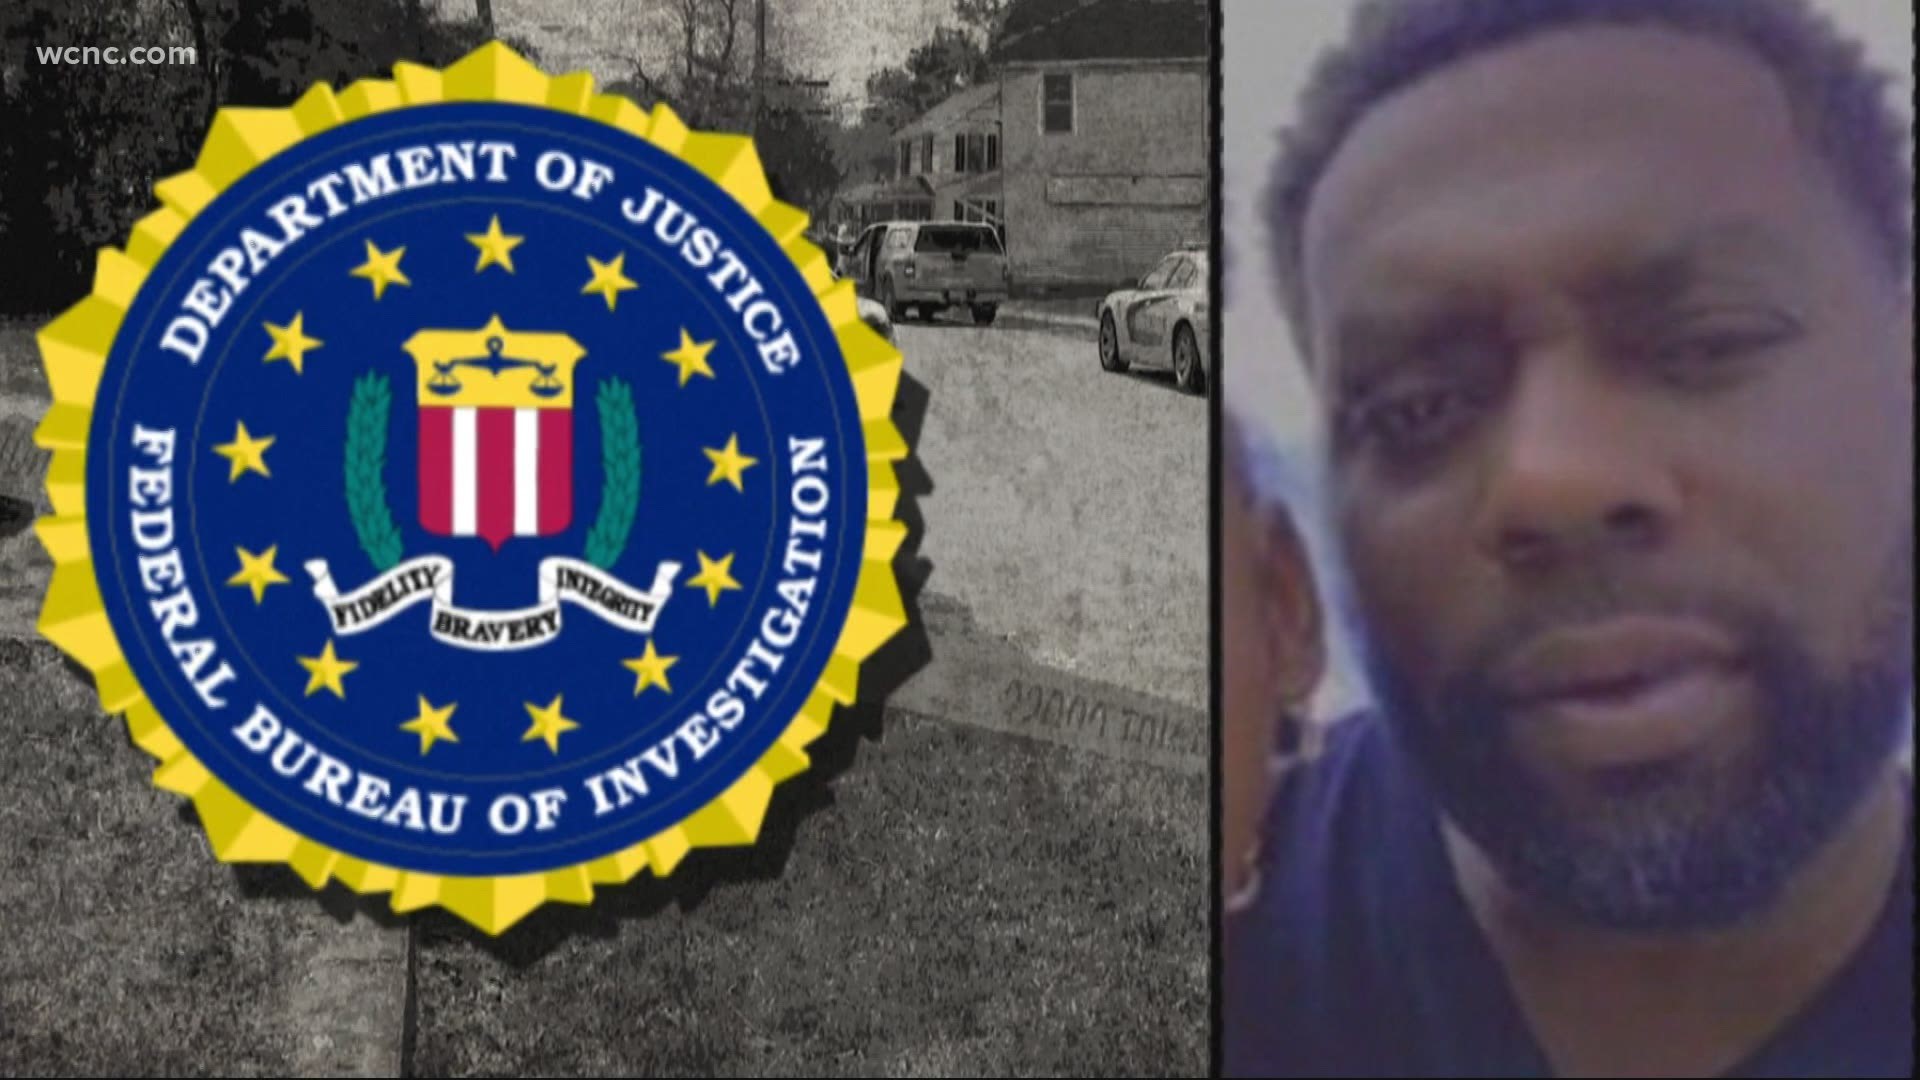 The FBI, U.S. Attorney's Office for the Eastern District of North Carolina and the DOJ Civil Rights Division will determine whether federal laws were violated.